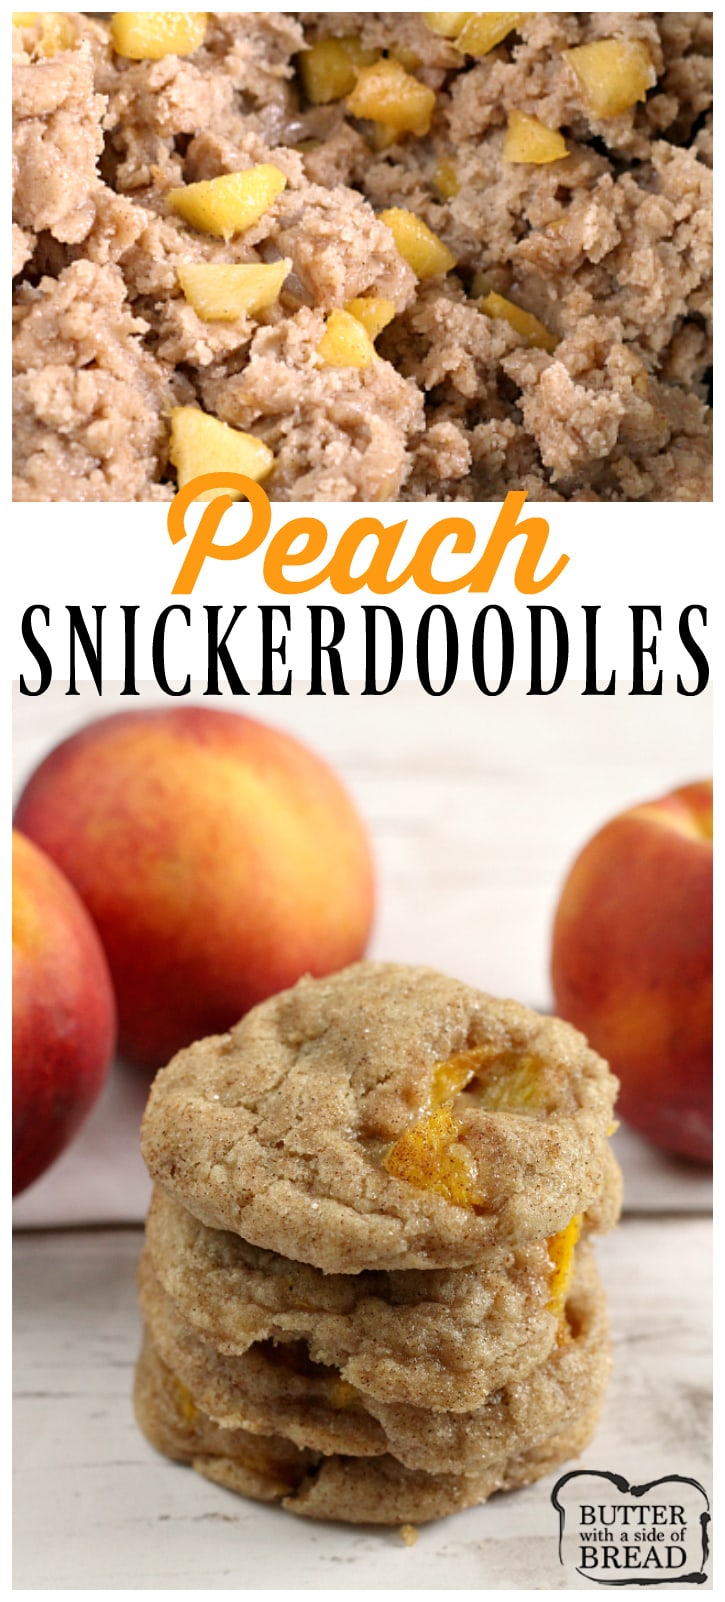 Peach Snickerdoodles are soft, chewy, delicious and the addition of fresh peaches takes your favorite cinnamon sugar cookie up a couple notches! These cookies with fruit are loaded with fresh, sweet peaches and warm cinnamon flavor that is simply delightful.